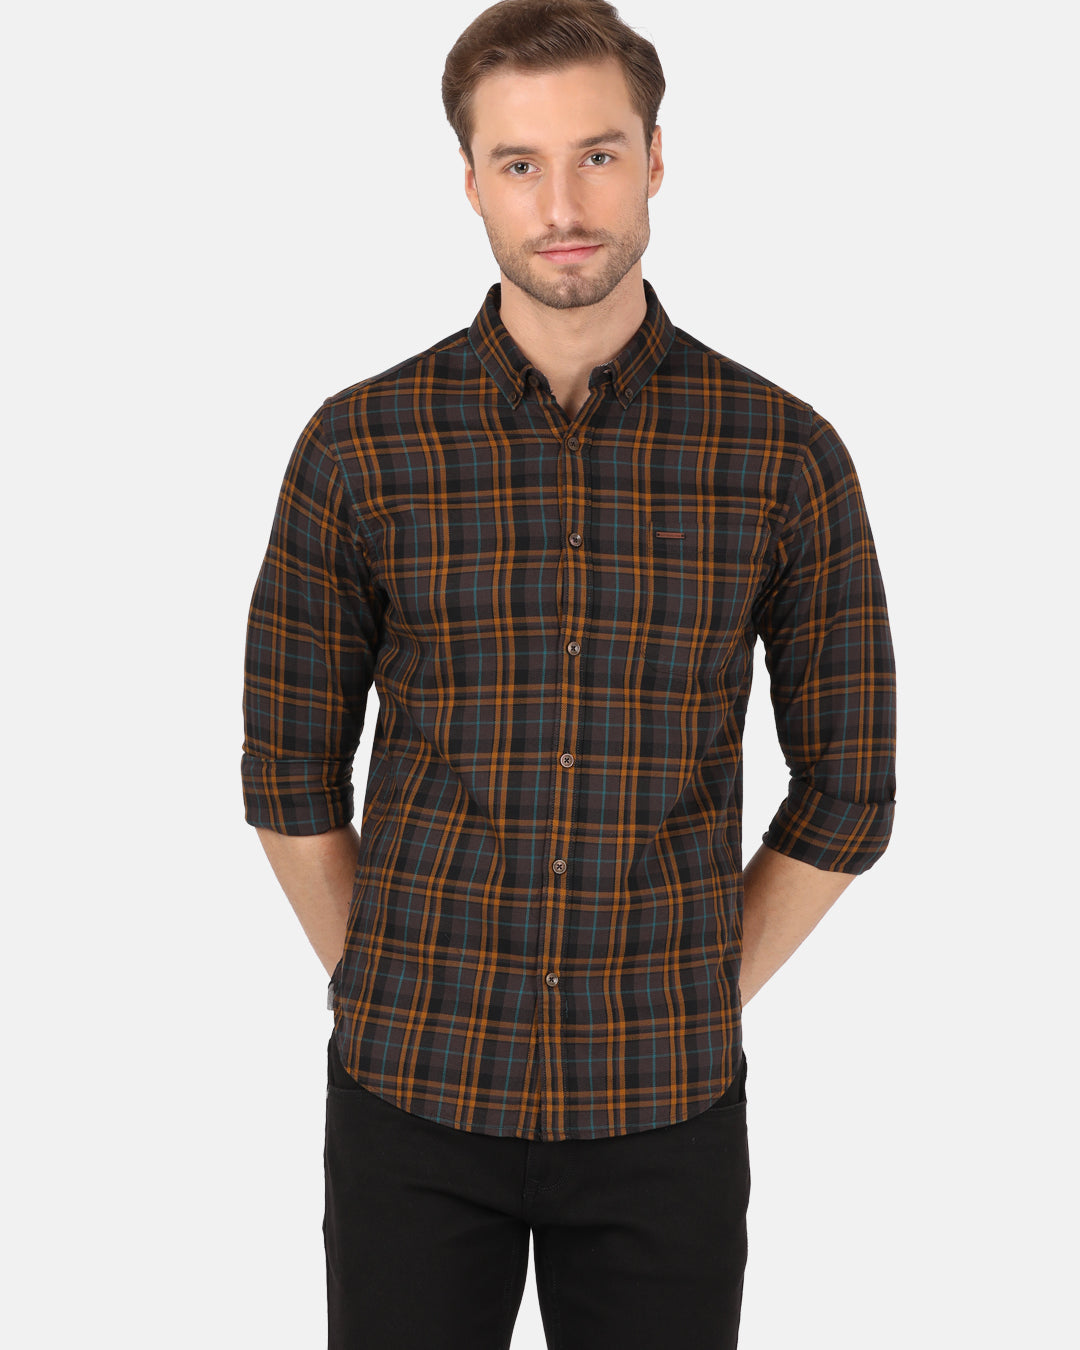 Crocodile Men's Casual Full Sleeve Comfort Fit Checks Brown With Collar Shirt Online